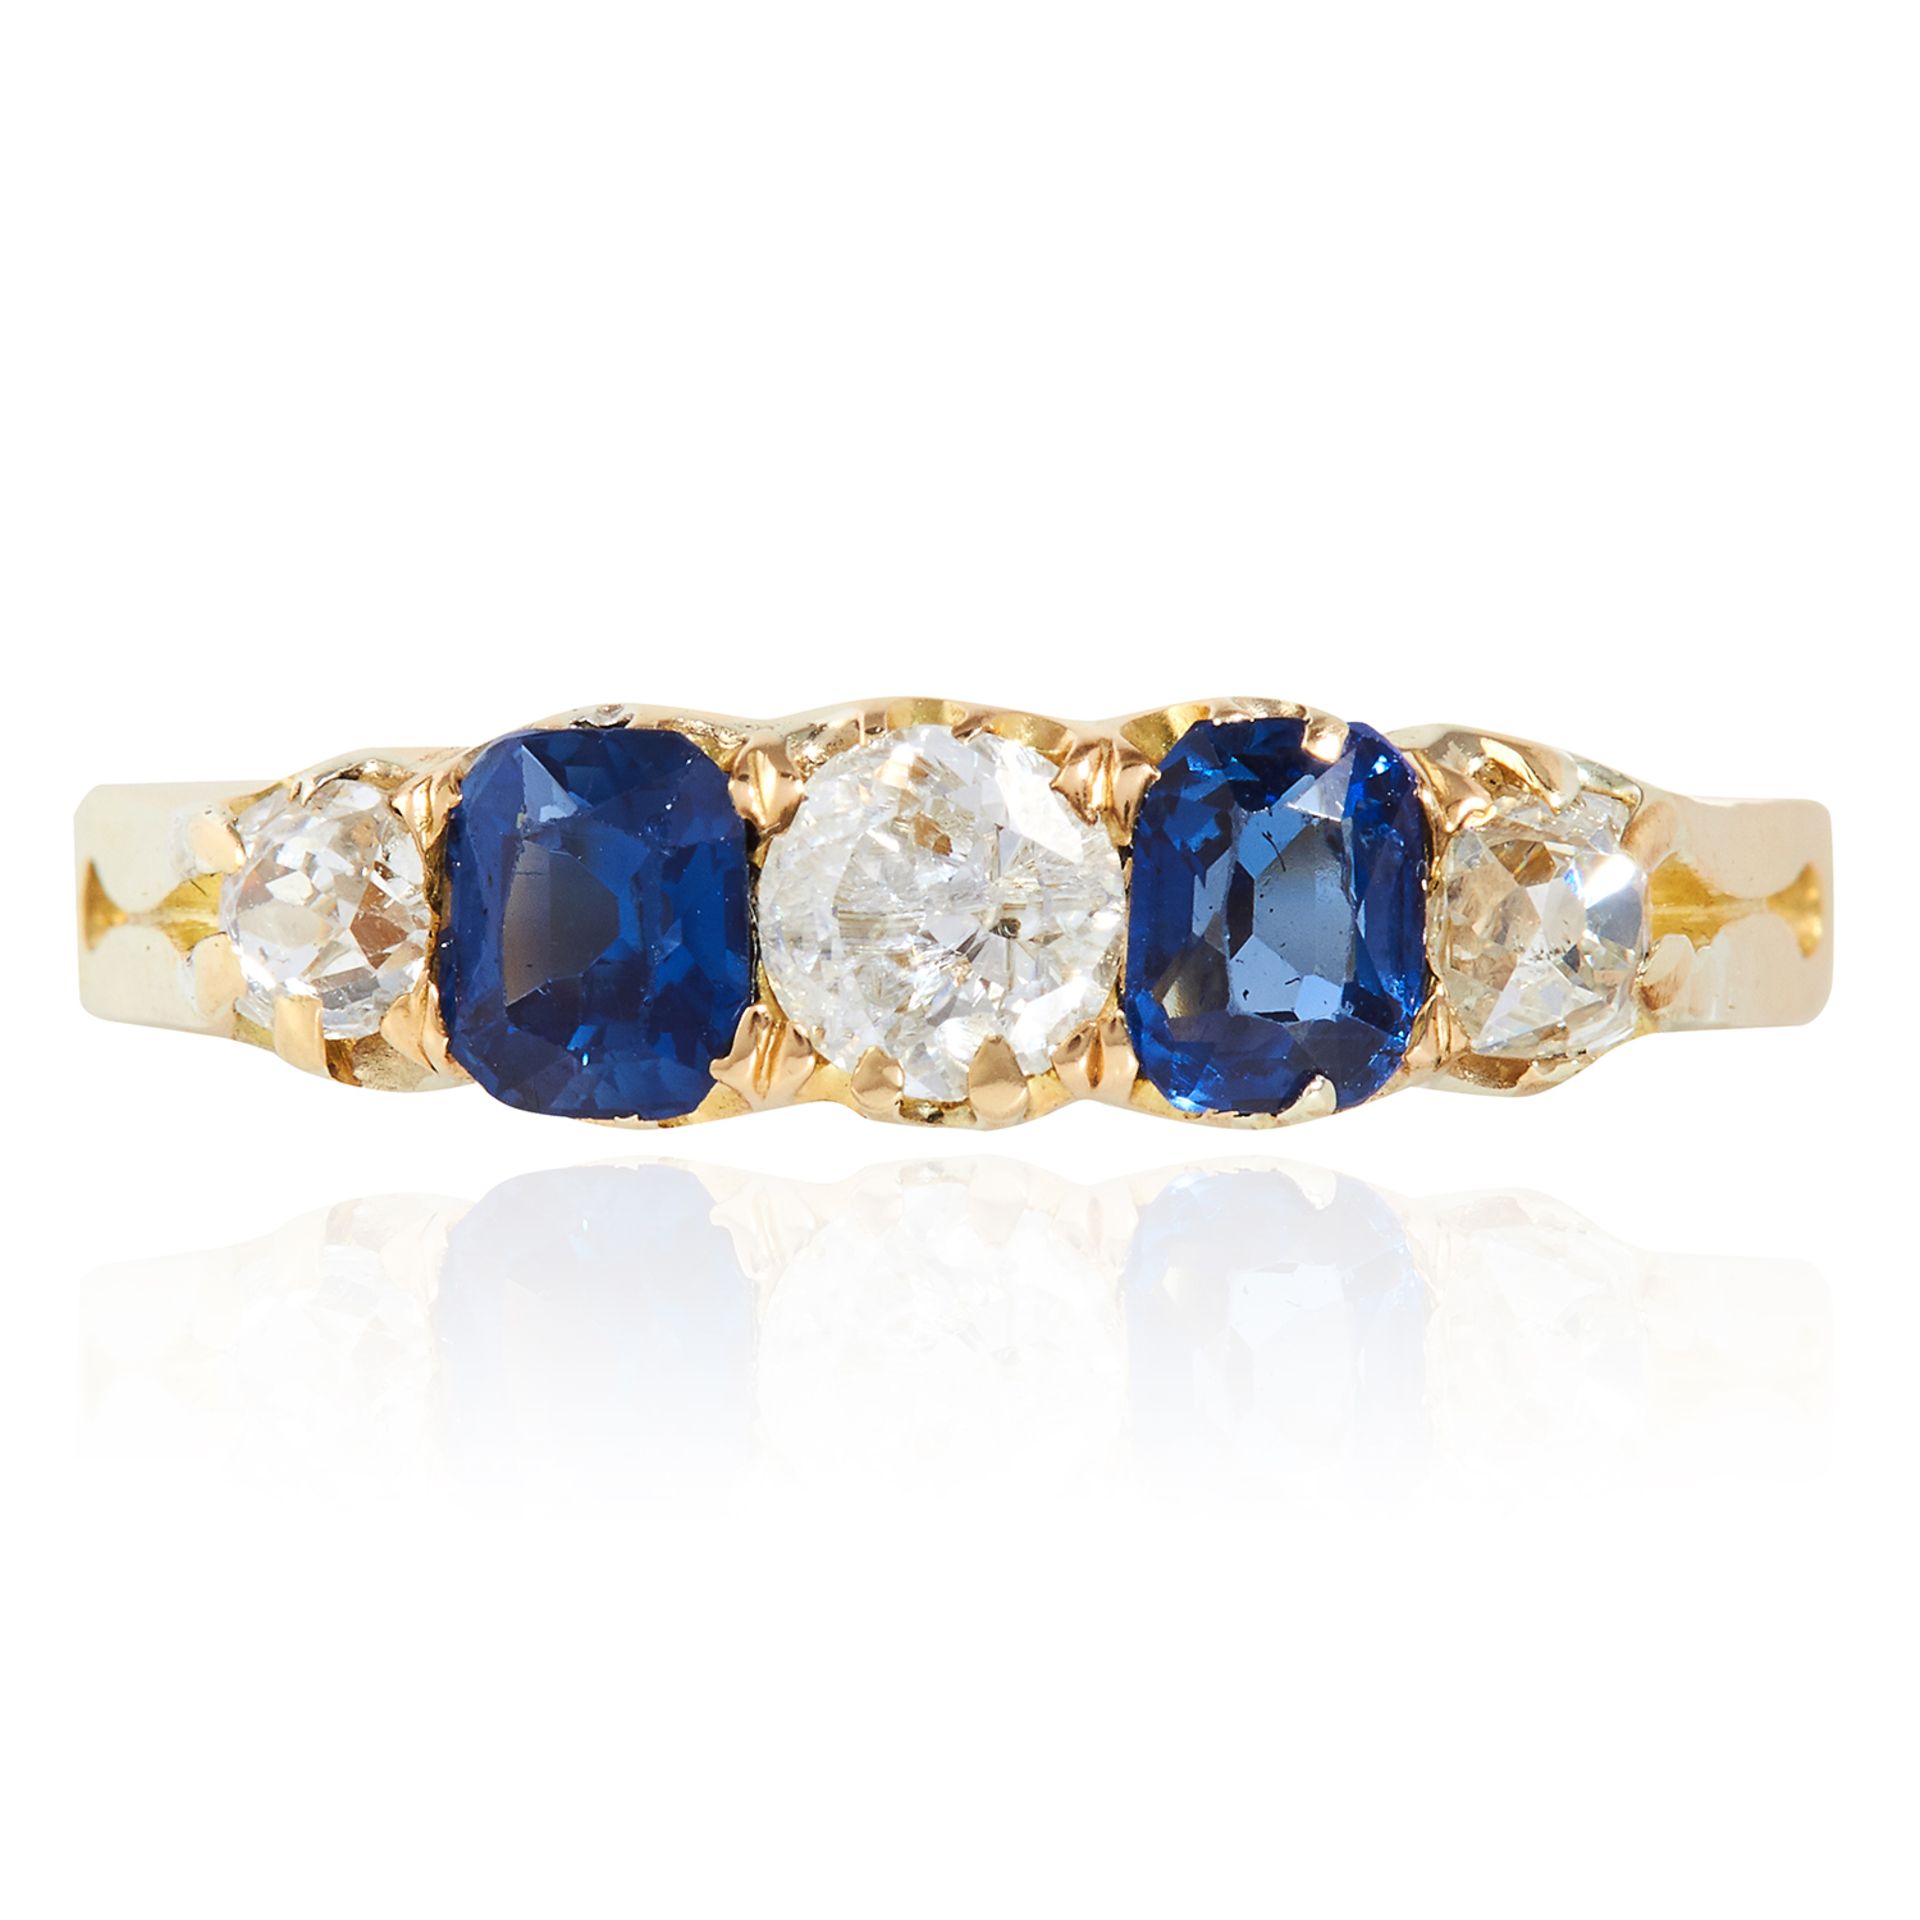 AN ANTIQUE SAPPHIRE AND DIAMOND RING in 18ct yellow gold, set with alternating oval cut sapphires